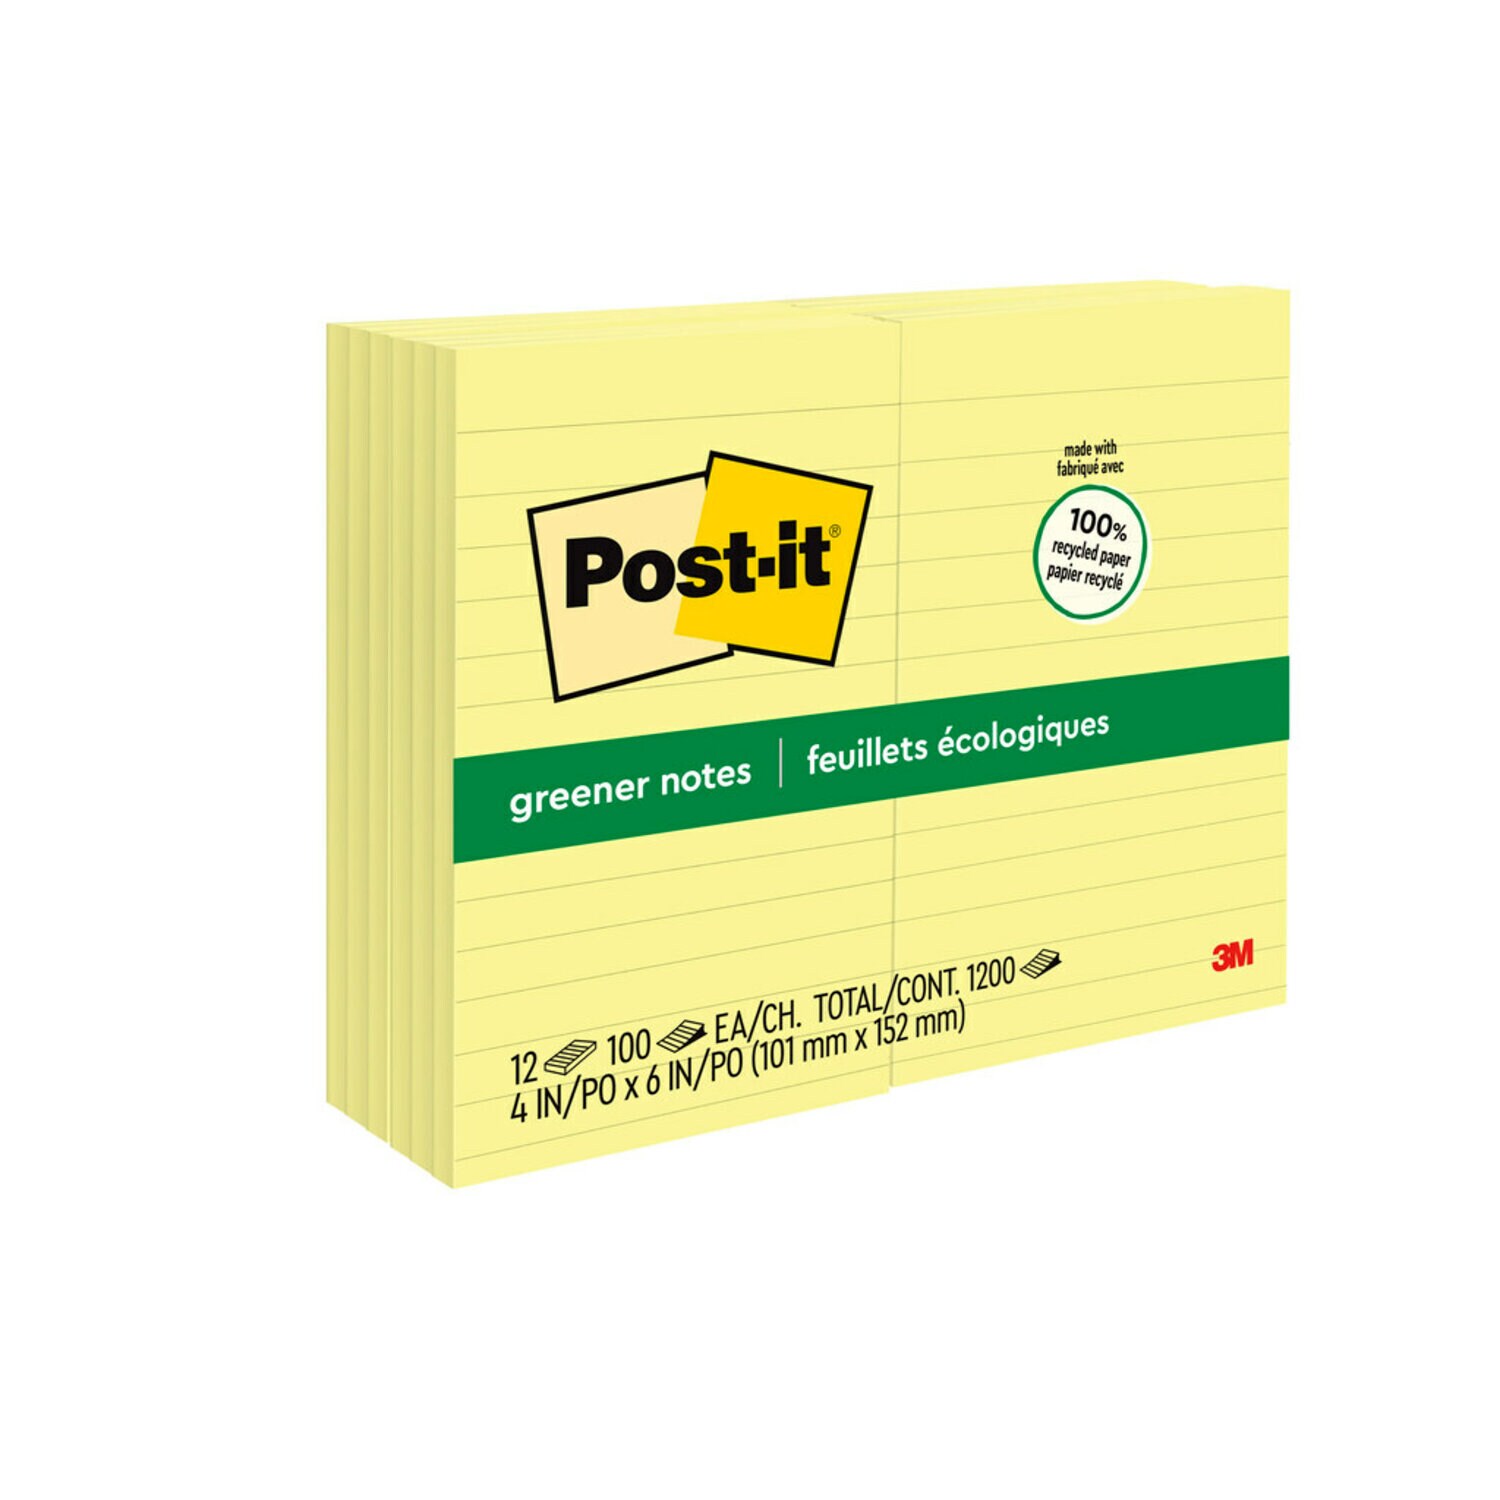 7100243767 - Post-it Notes 660-RP, 4 in x 6 in (101 mm x 152 mm)